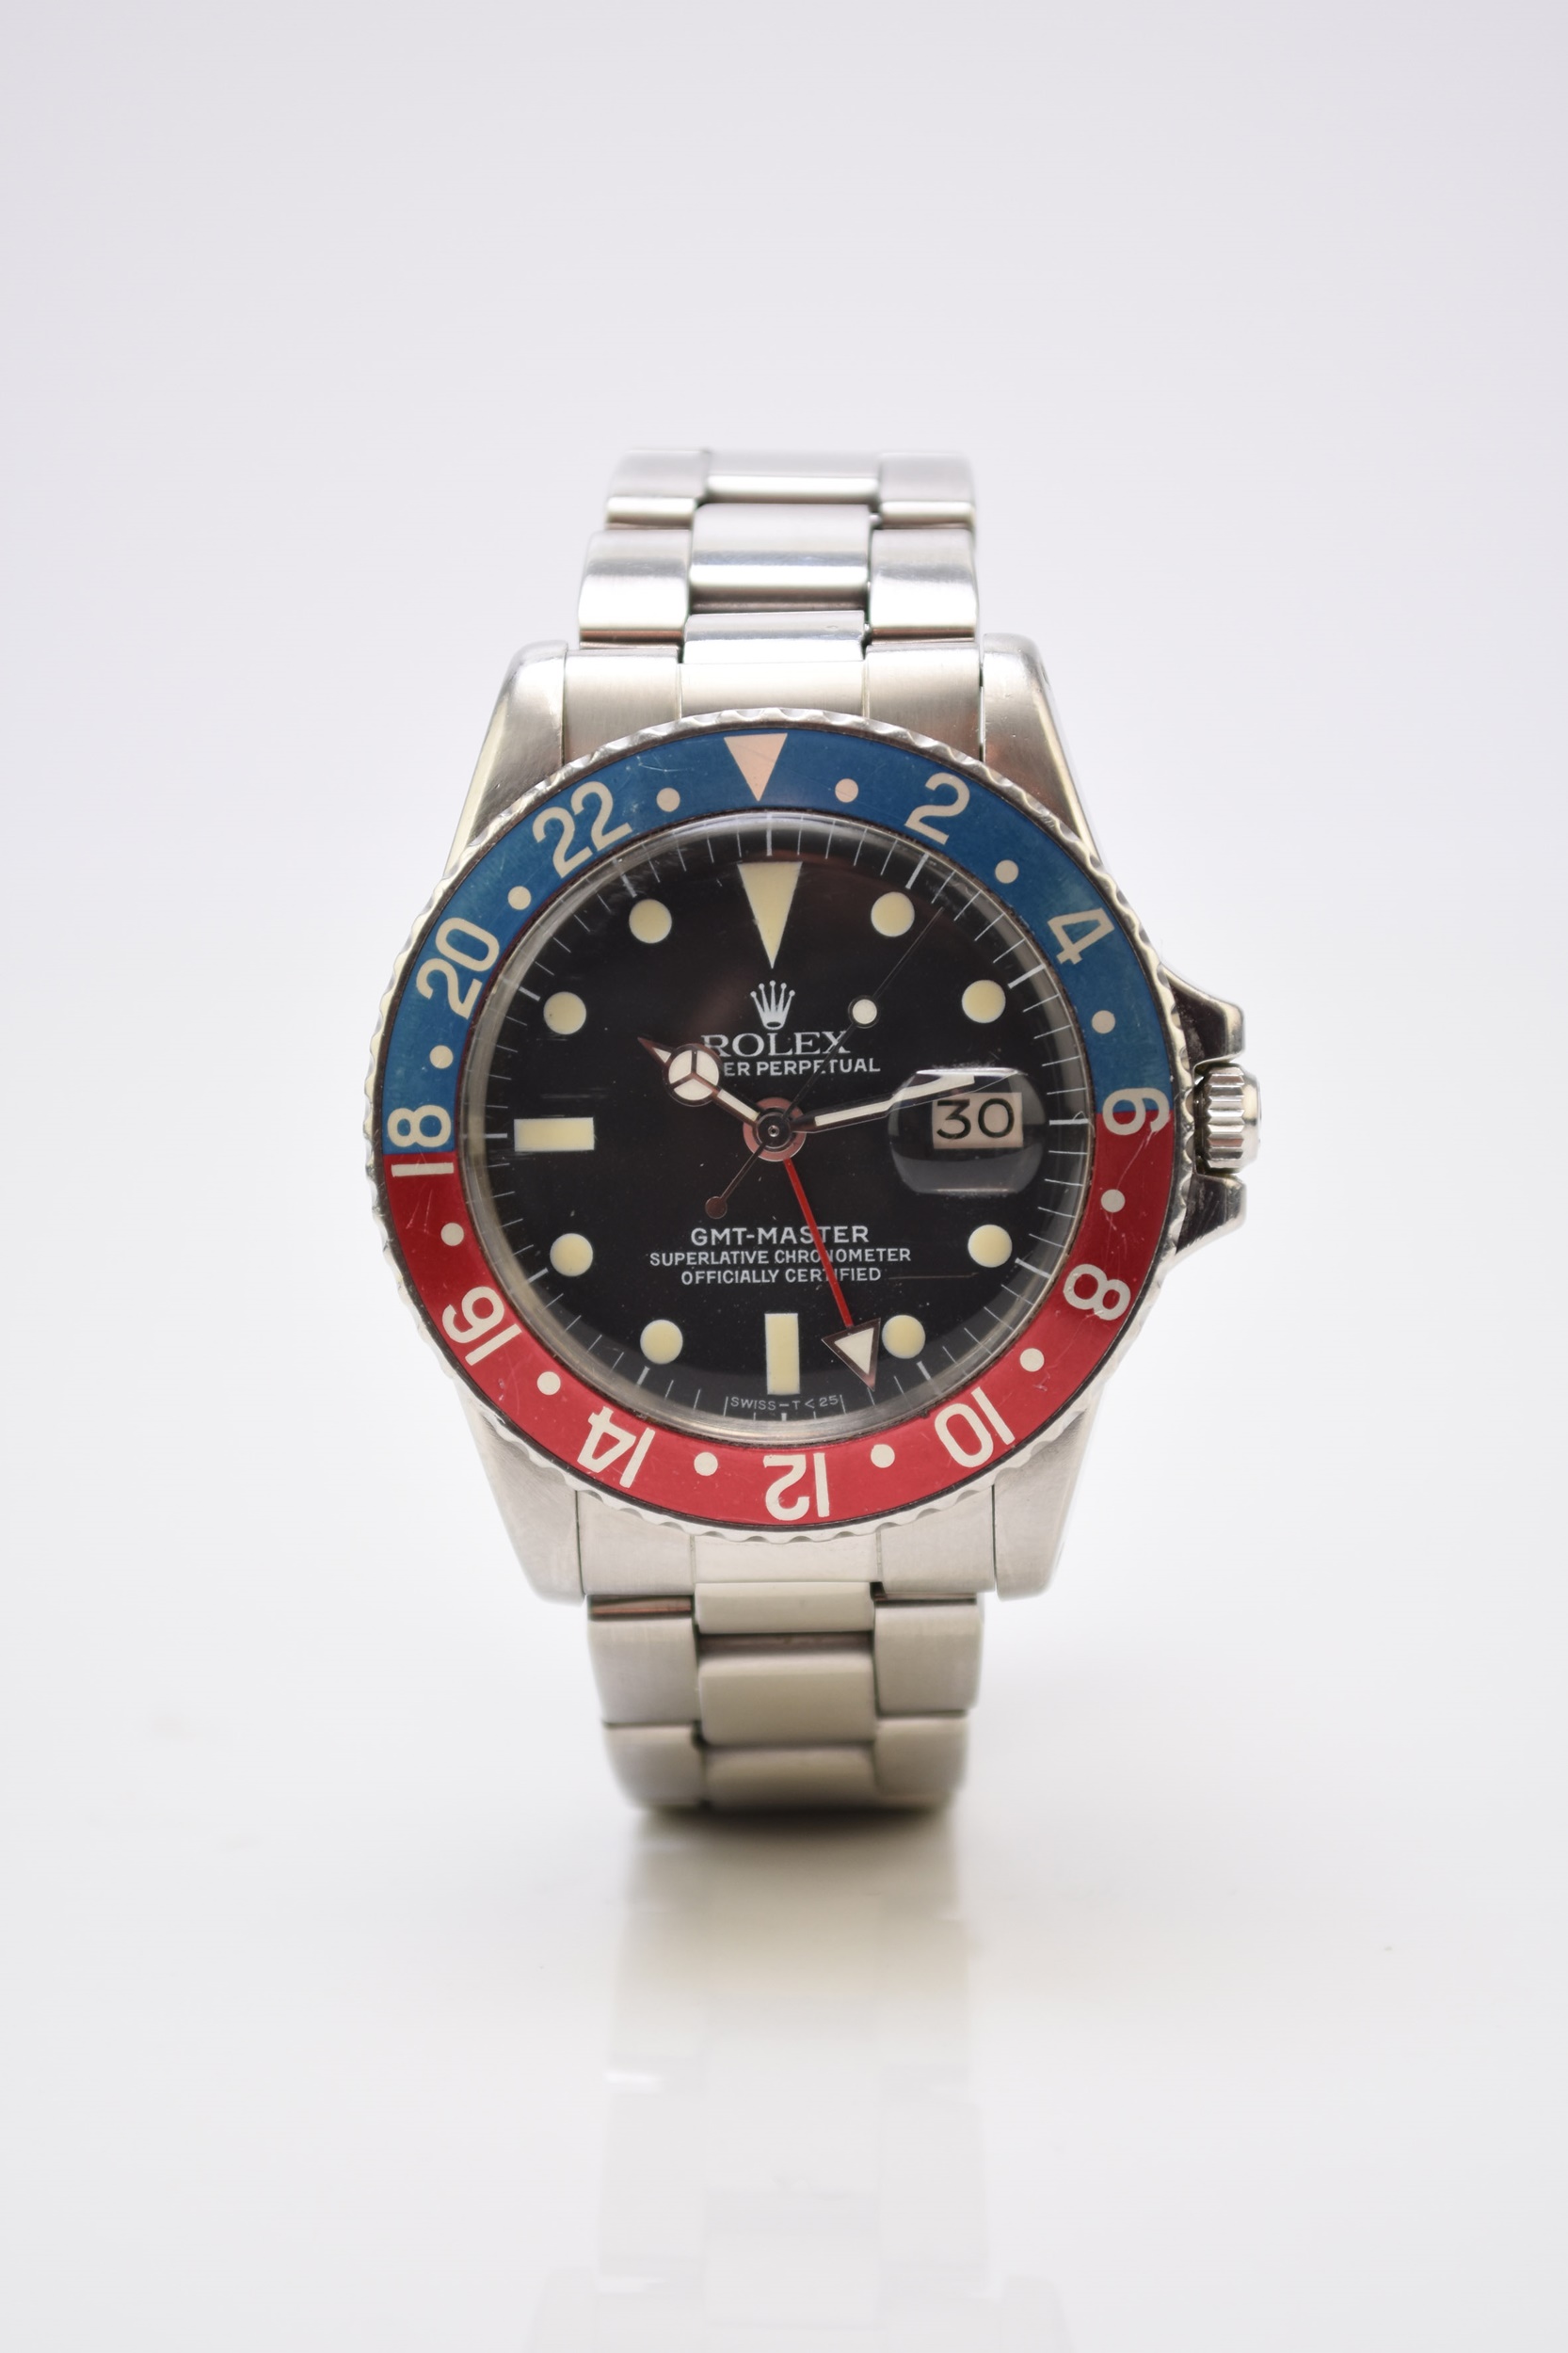 The Rolex GMT Master wristwatch owned and worn by maritime explorer Vital Alsar.